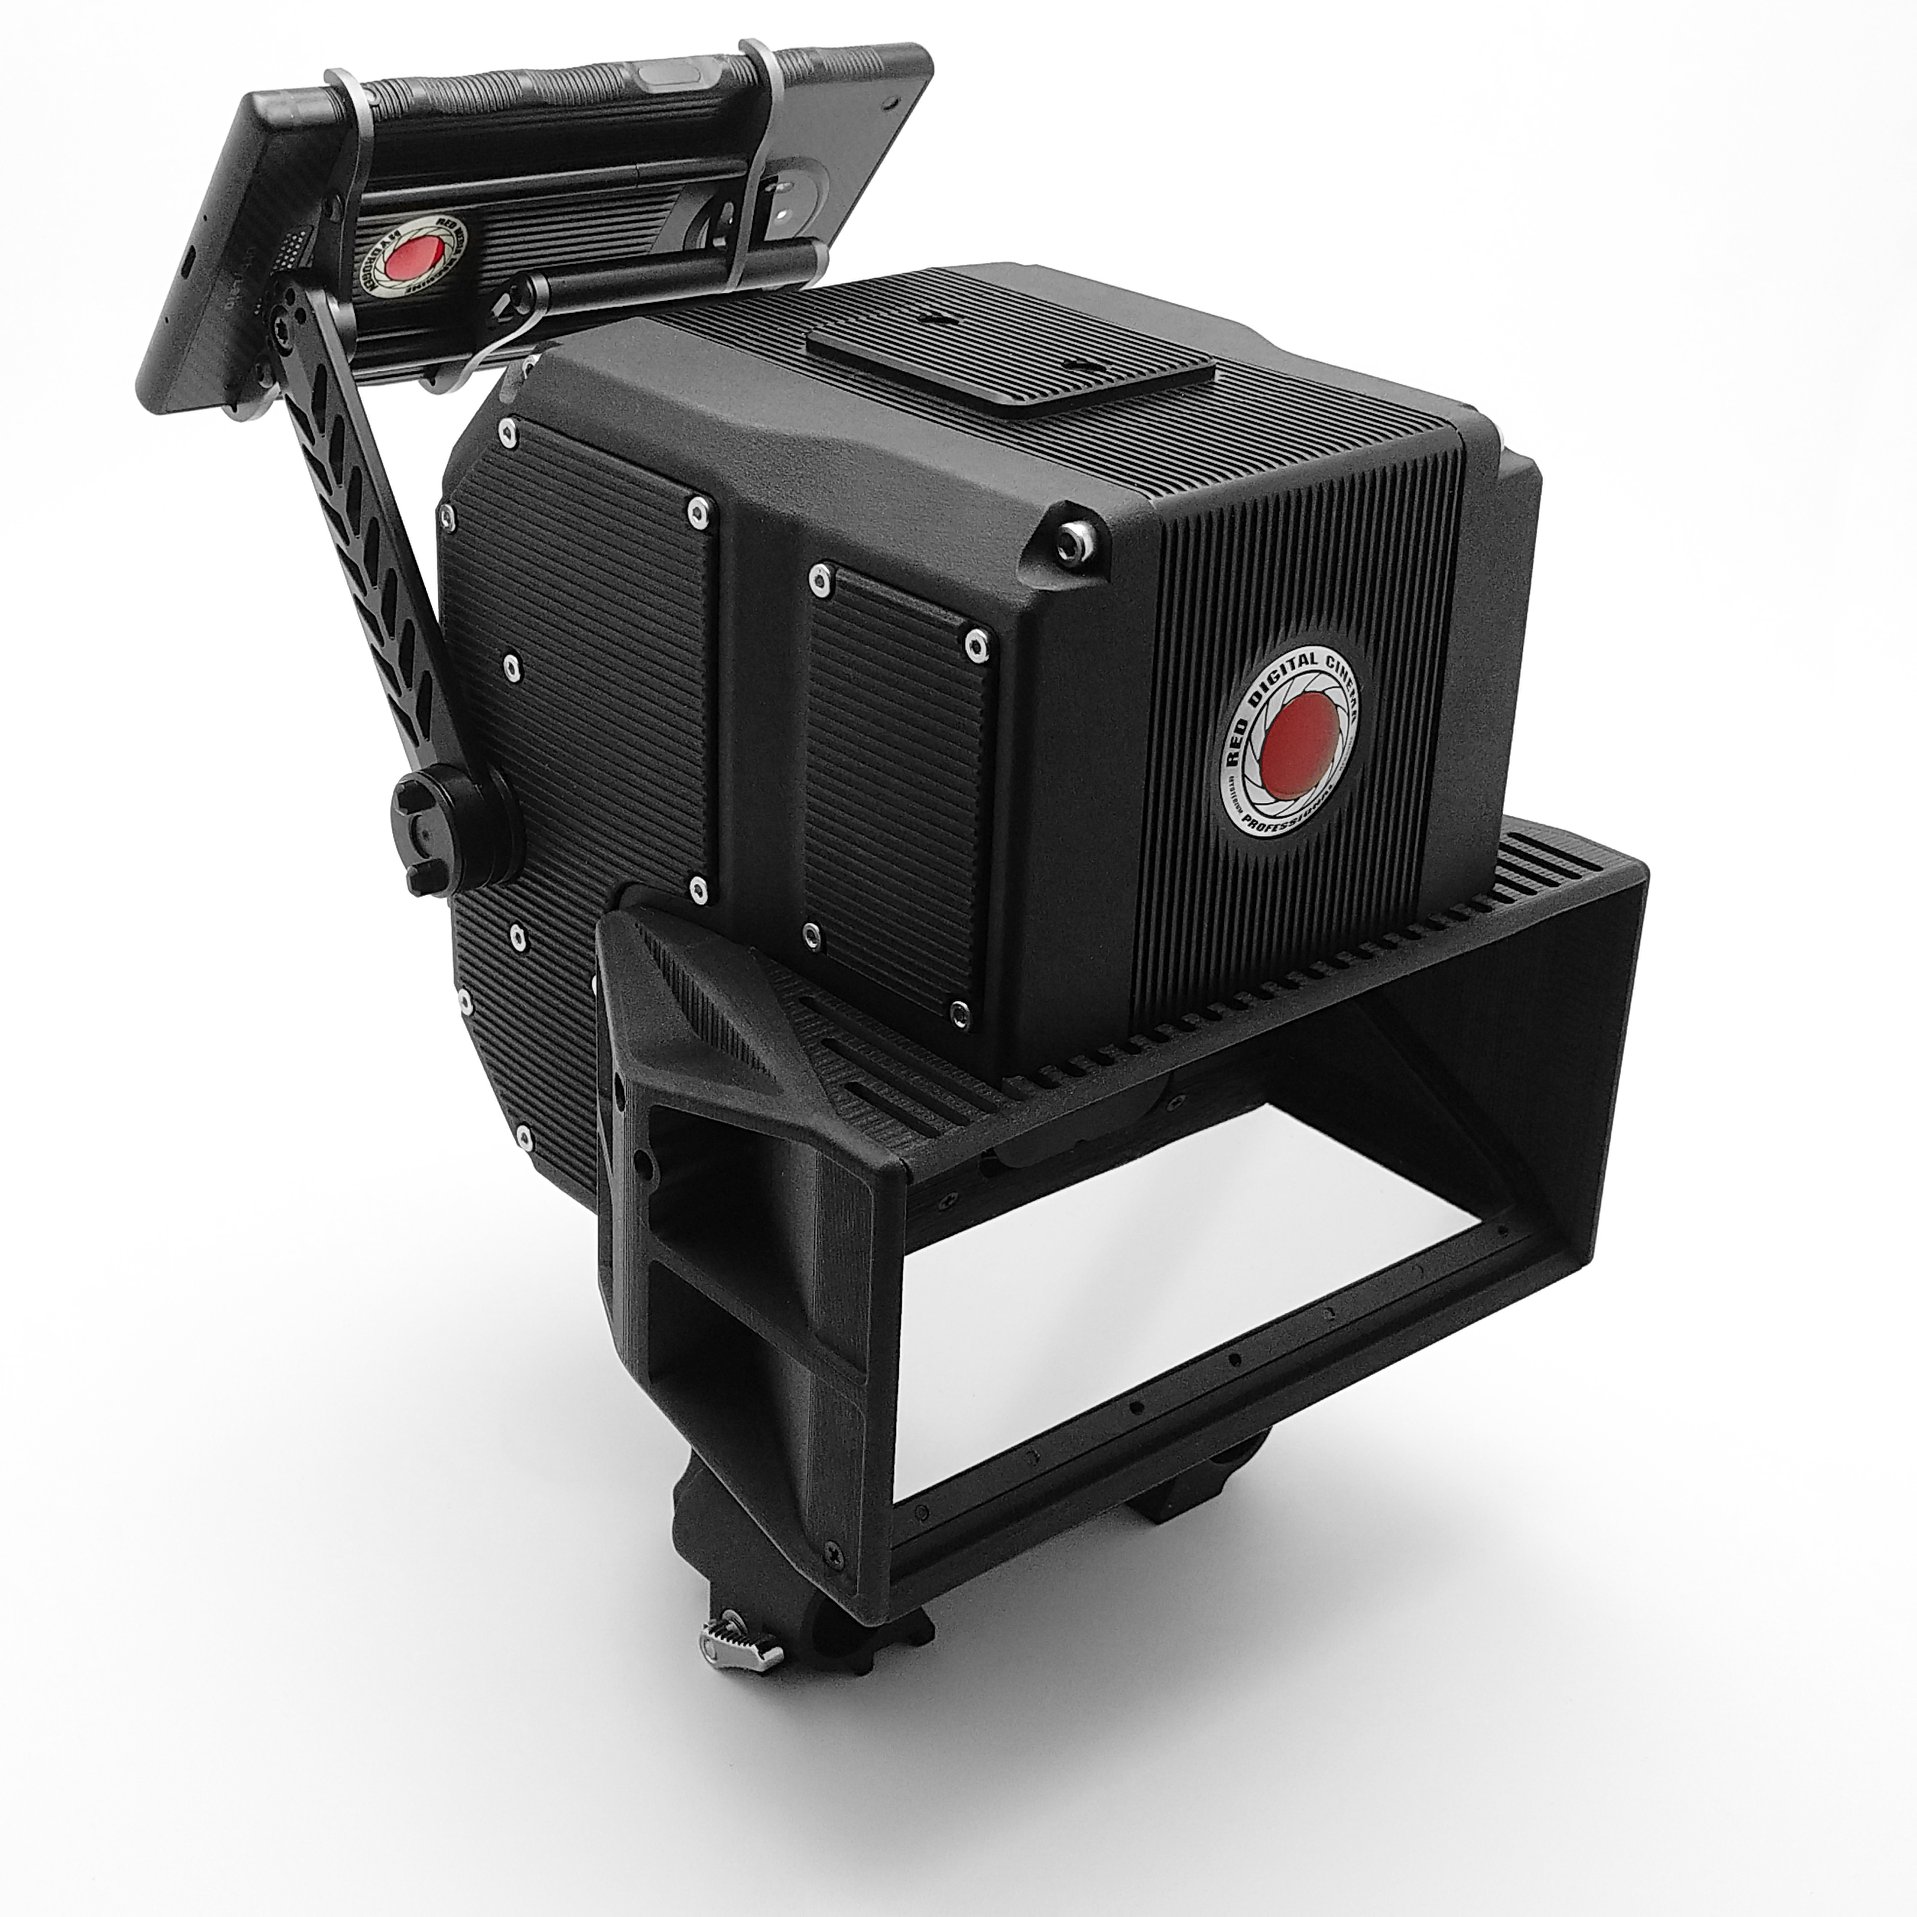 An official image of the Lithium camera for the Red Hydrogen One.